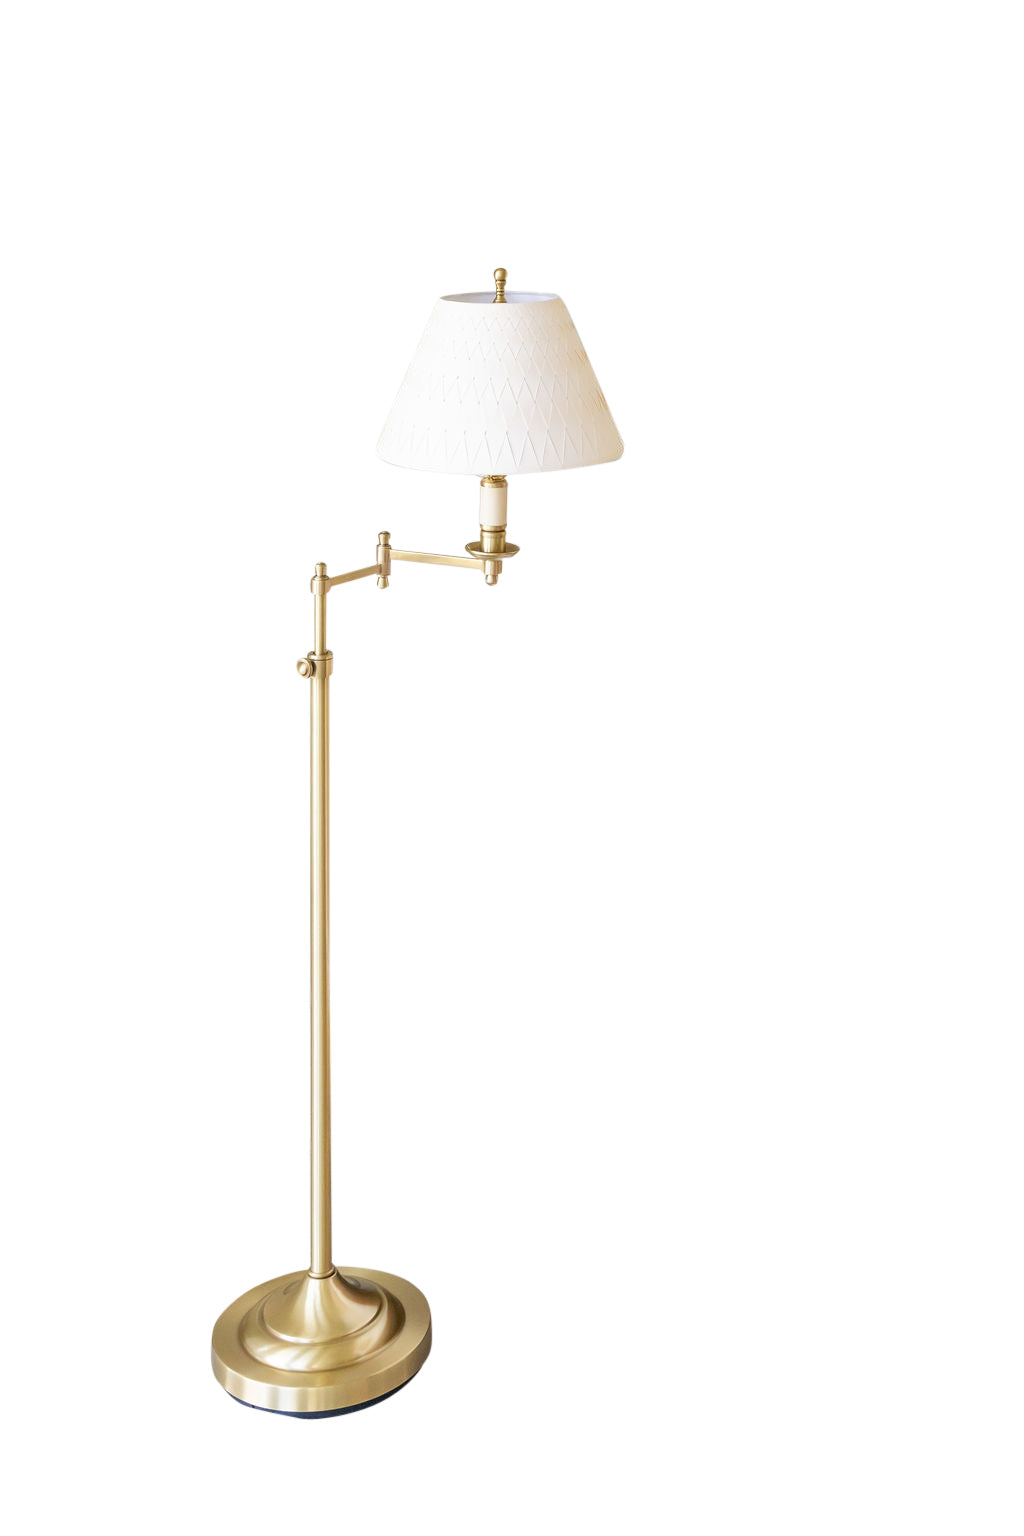 Swing Arm Floor Lamp with Adjustable Height at $465.00, Newport Lamp And  Shade